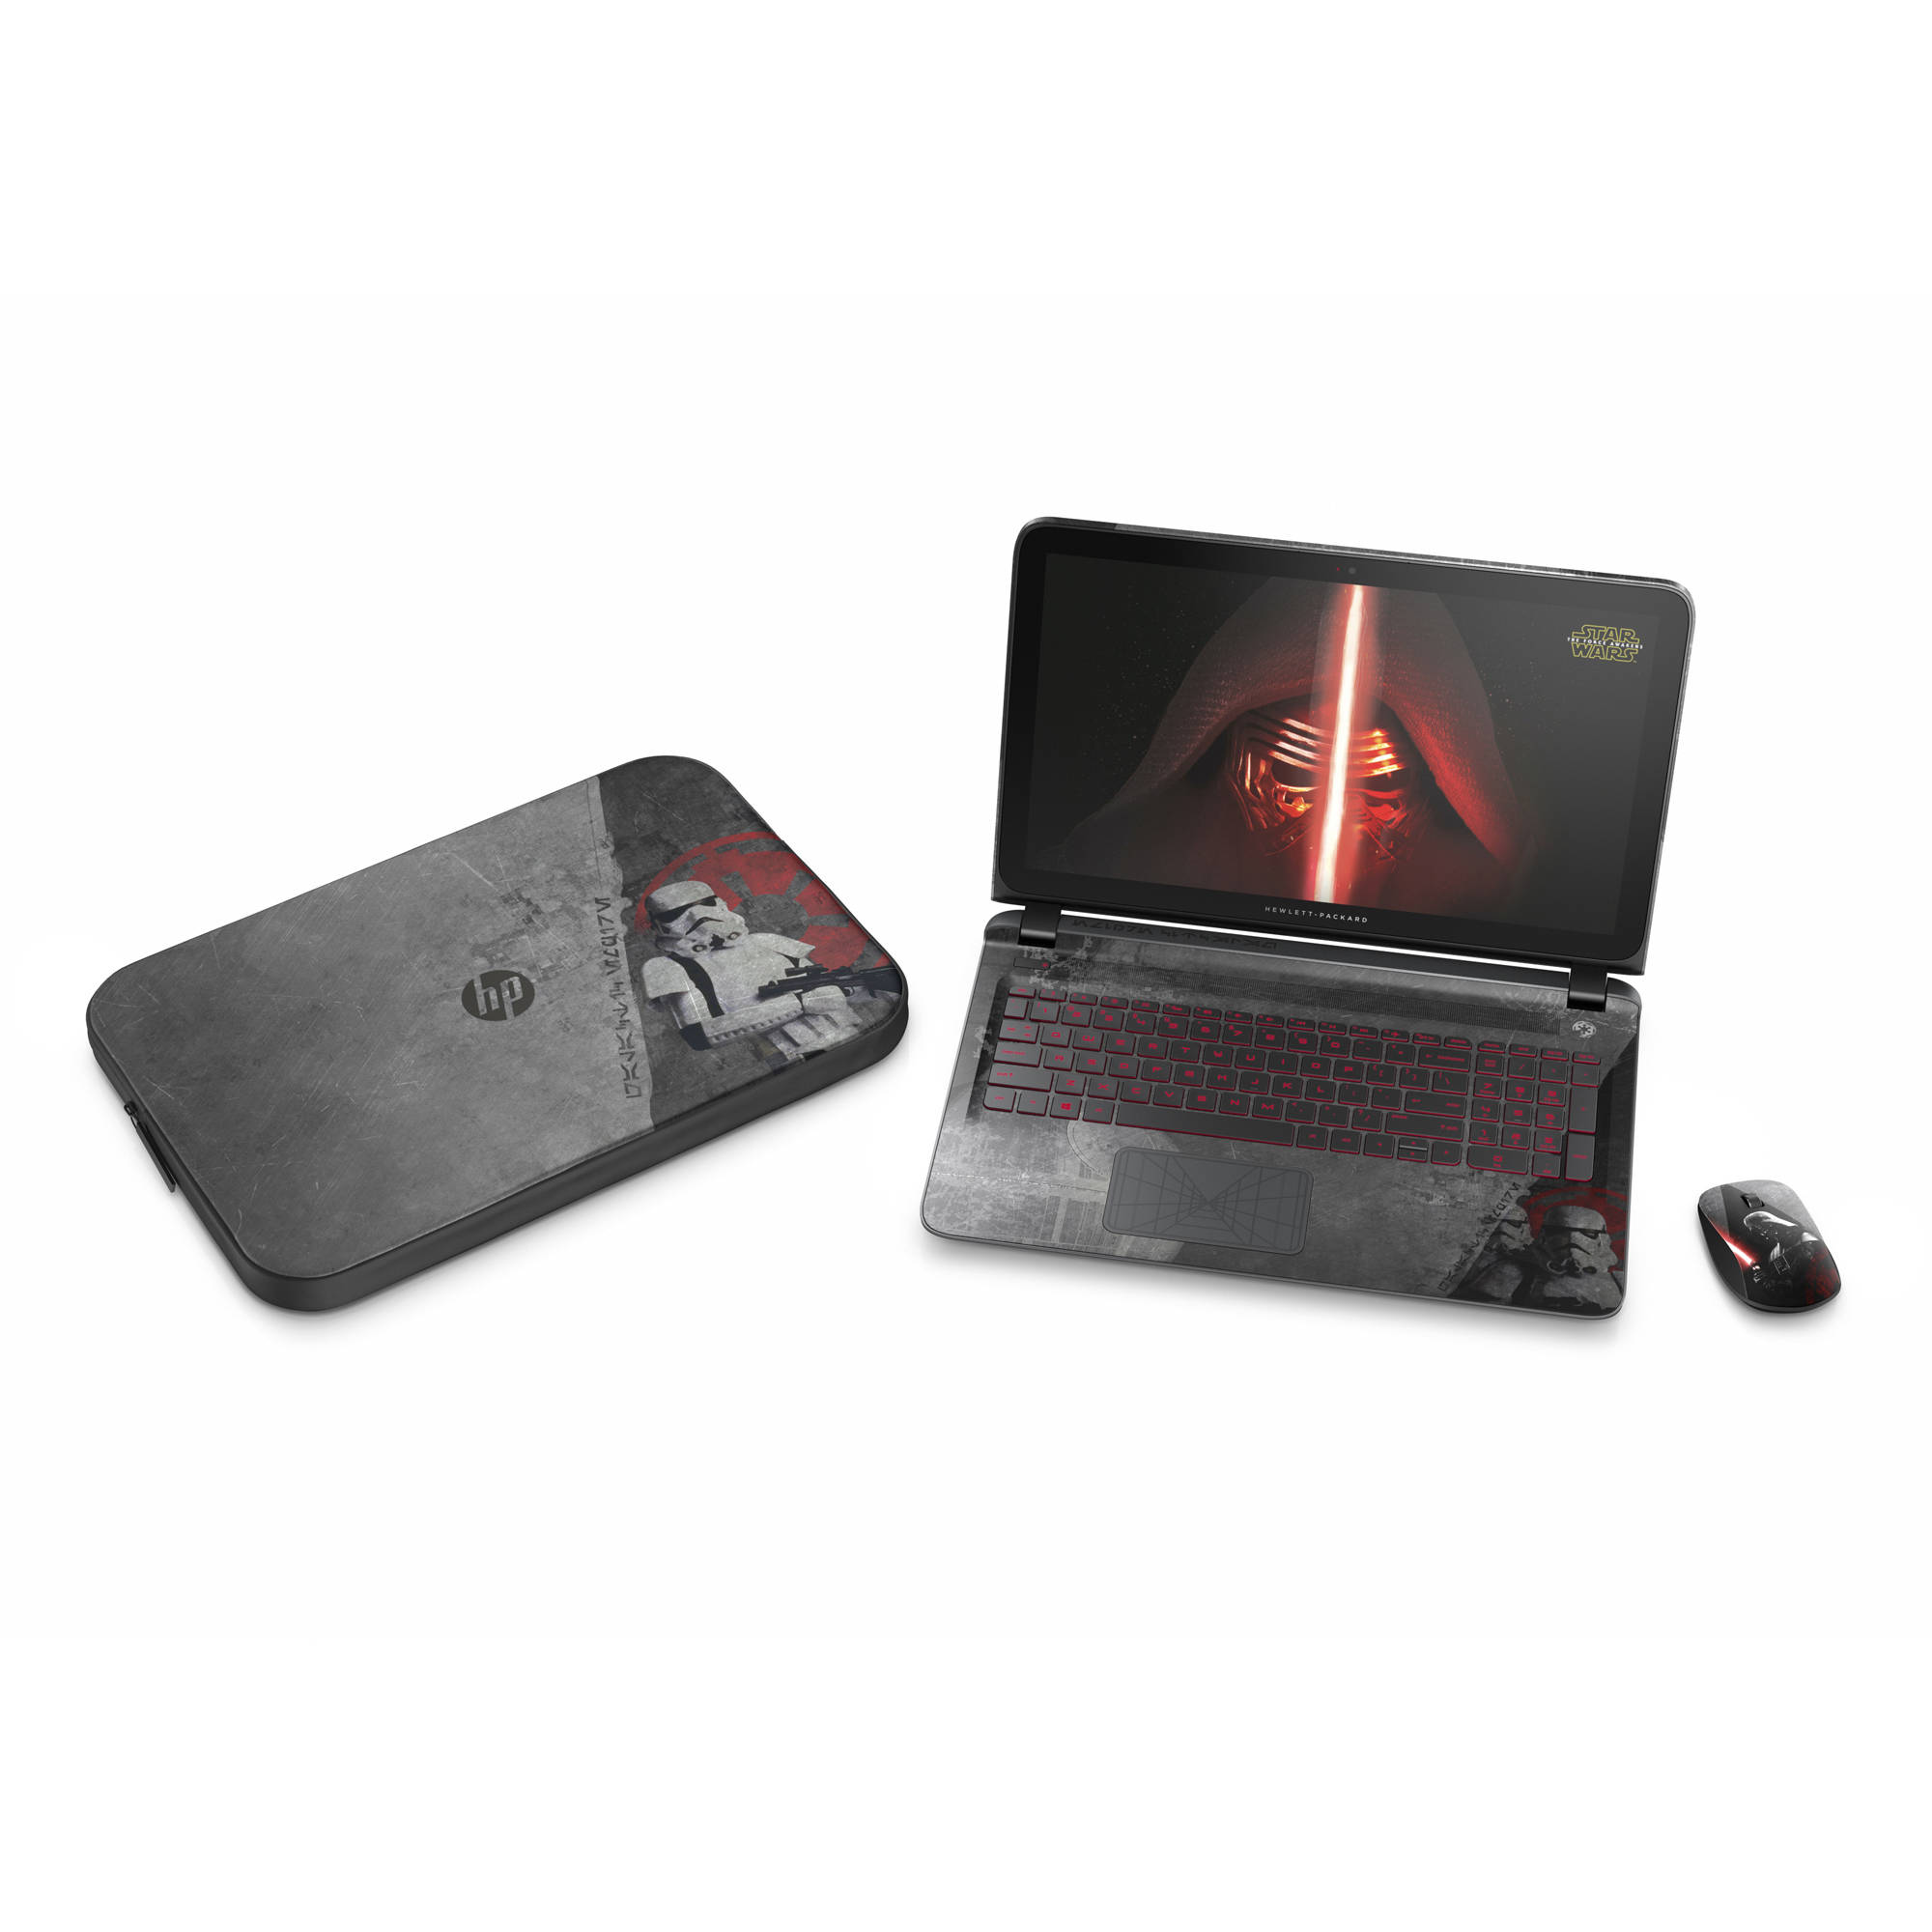 HP Star Wars Special Edition Sleeve, Fits Most Laptops Up to 15.6" - image 3 of 3